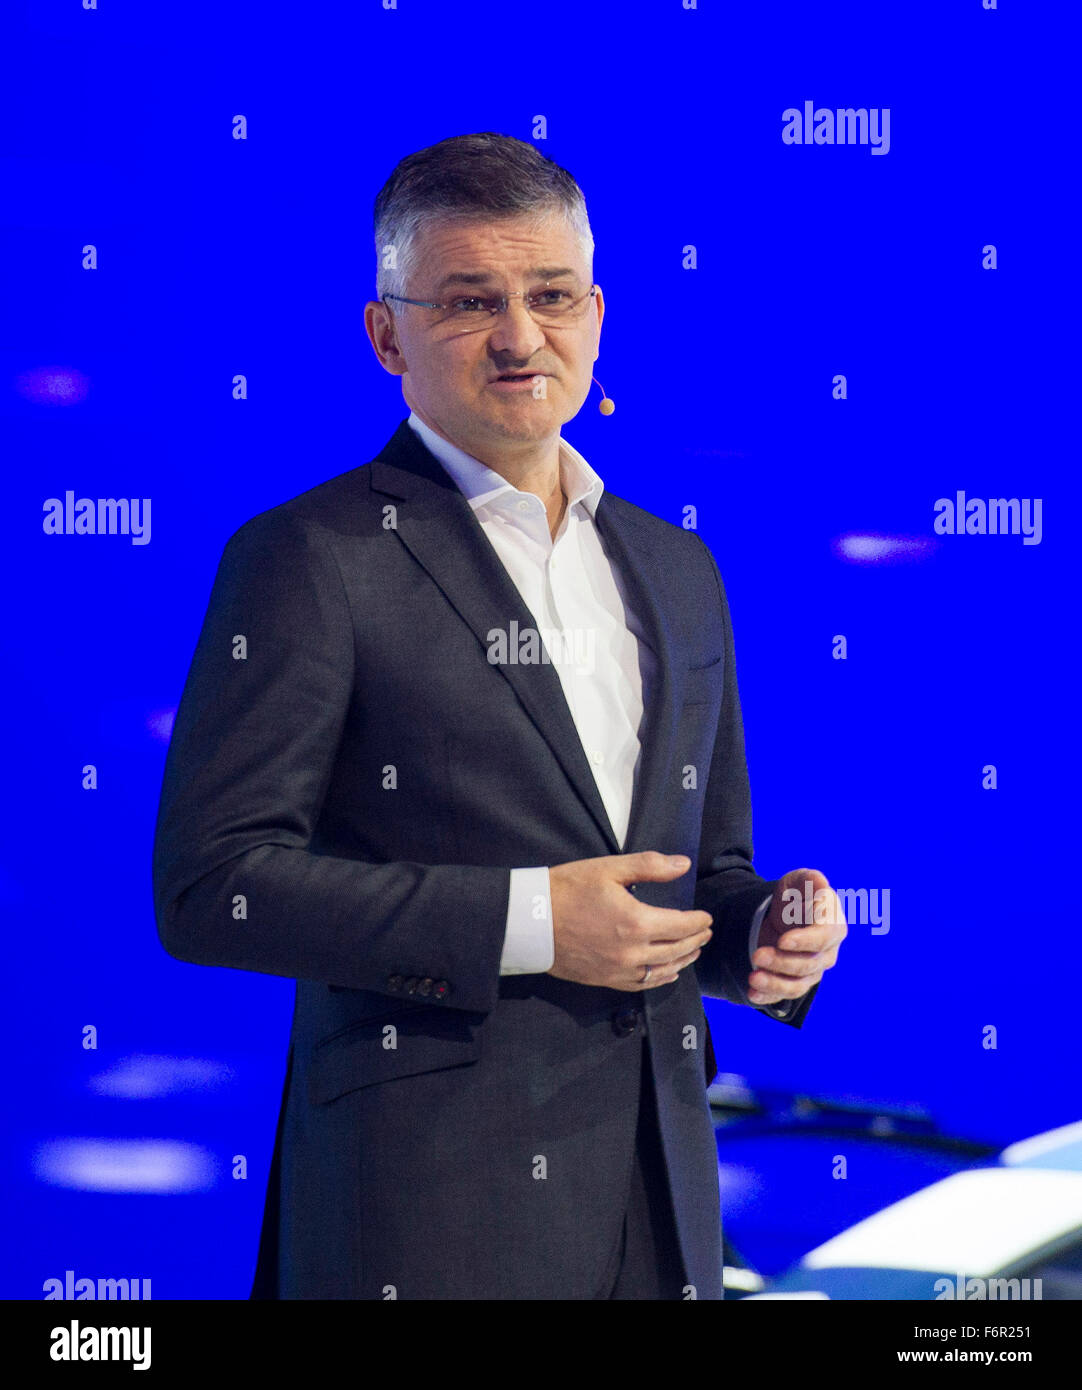 Los Angeles, USA. 18th Nov, 2015. Michael Horn, president and CEO of Volkswagen Group of America, apologizes for Volkswagen's emissions testing scandal at the Los Angeles Auto Show in Los Angeles, the United States, on Nov. 18, 2015. © Yang Lei/Xinhua/Alamy Live News Stock Photo